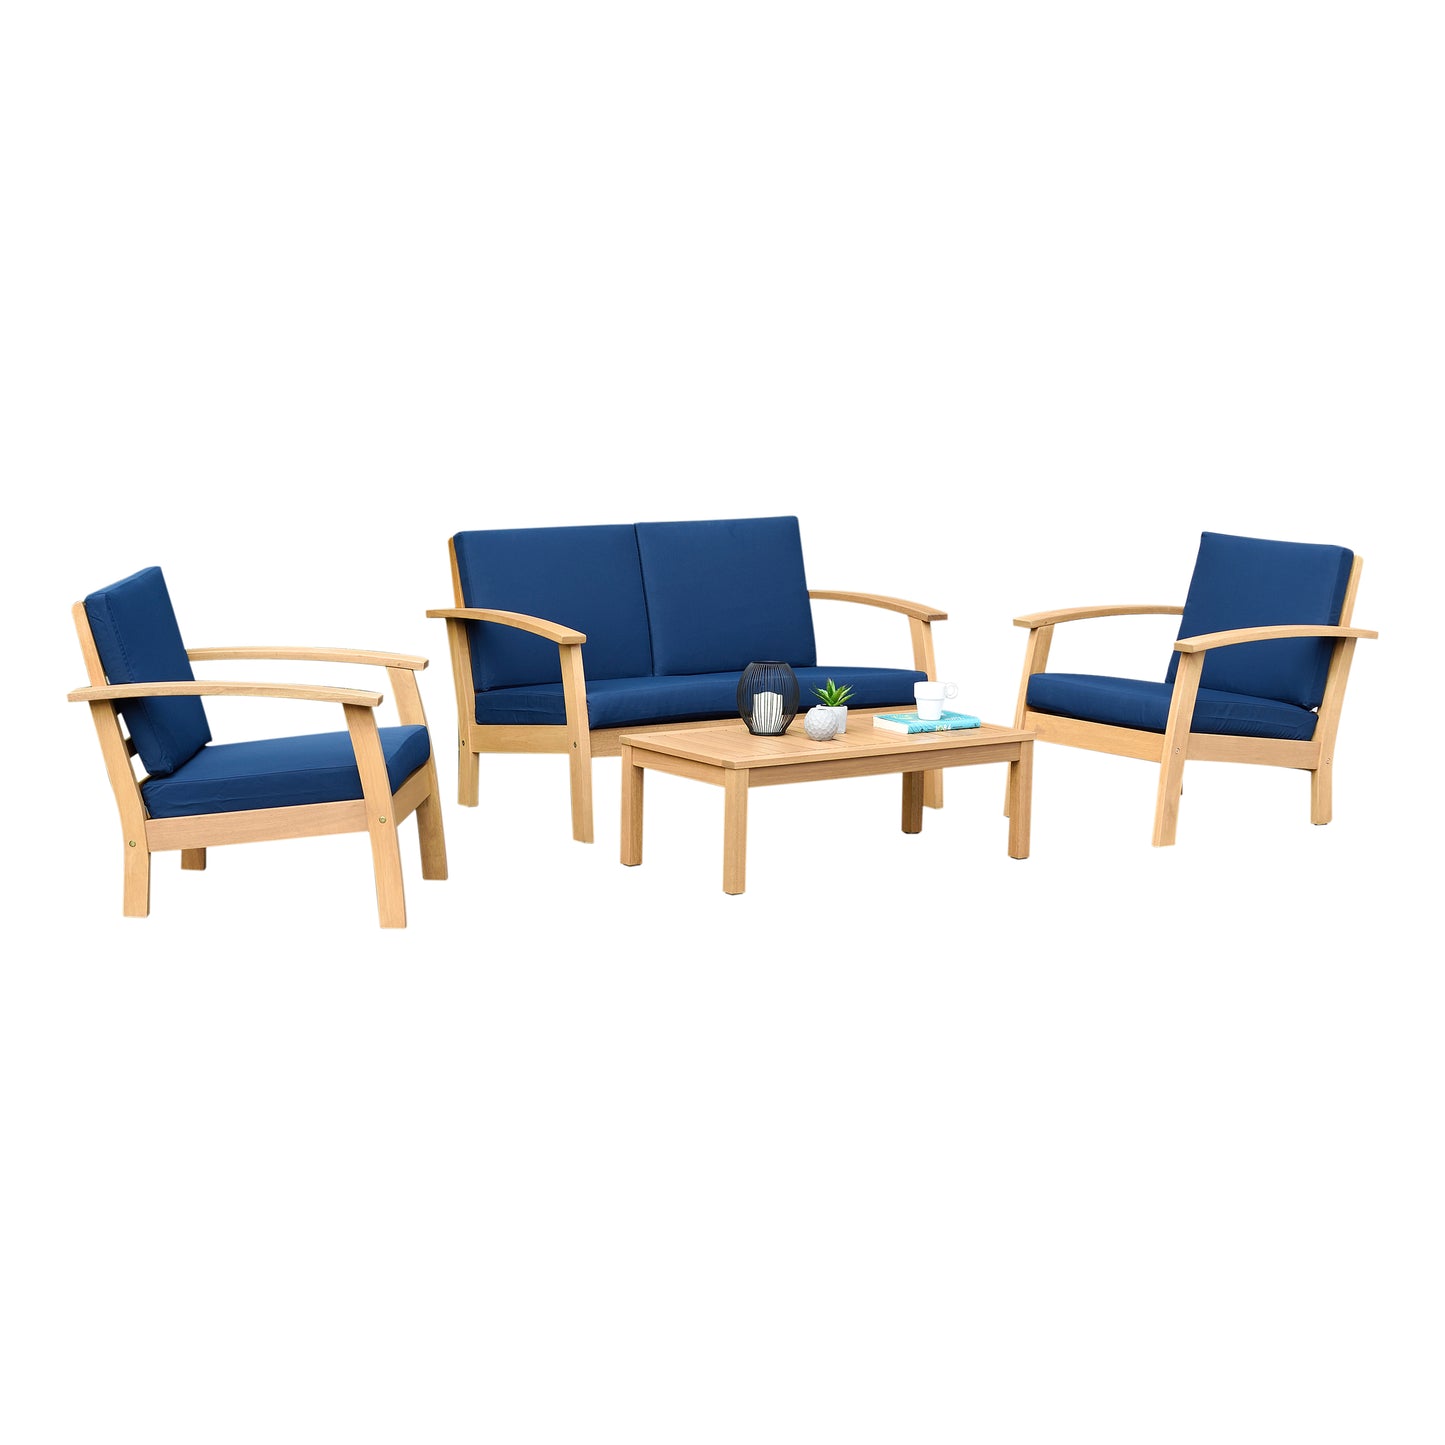 Kingsbury Teak Finish 100% FSC Certified Solid Wood With White Cushion Seating